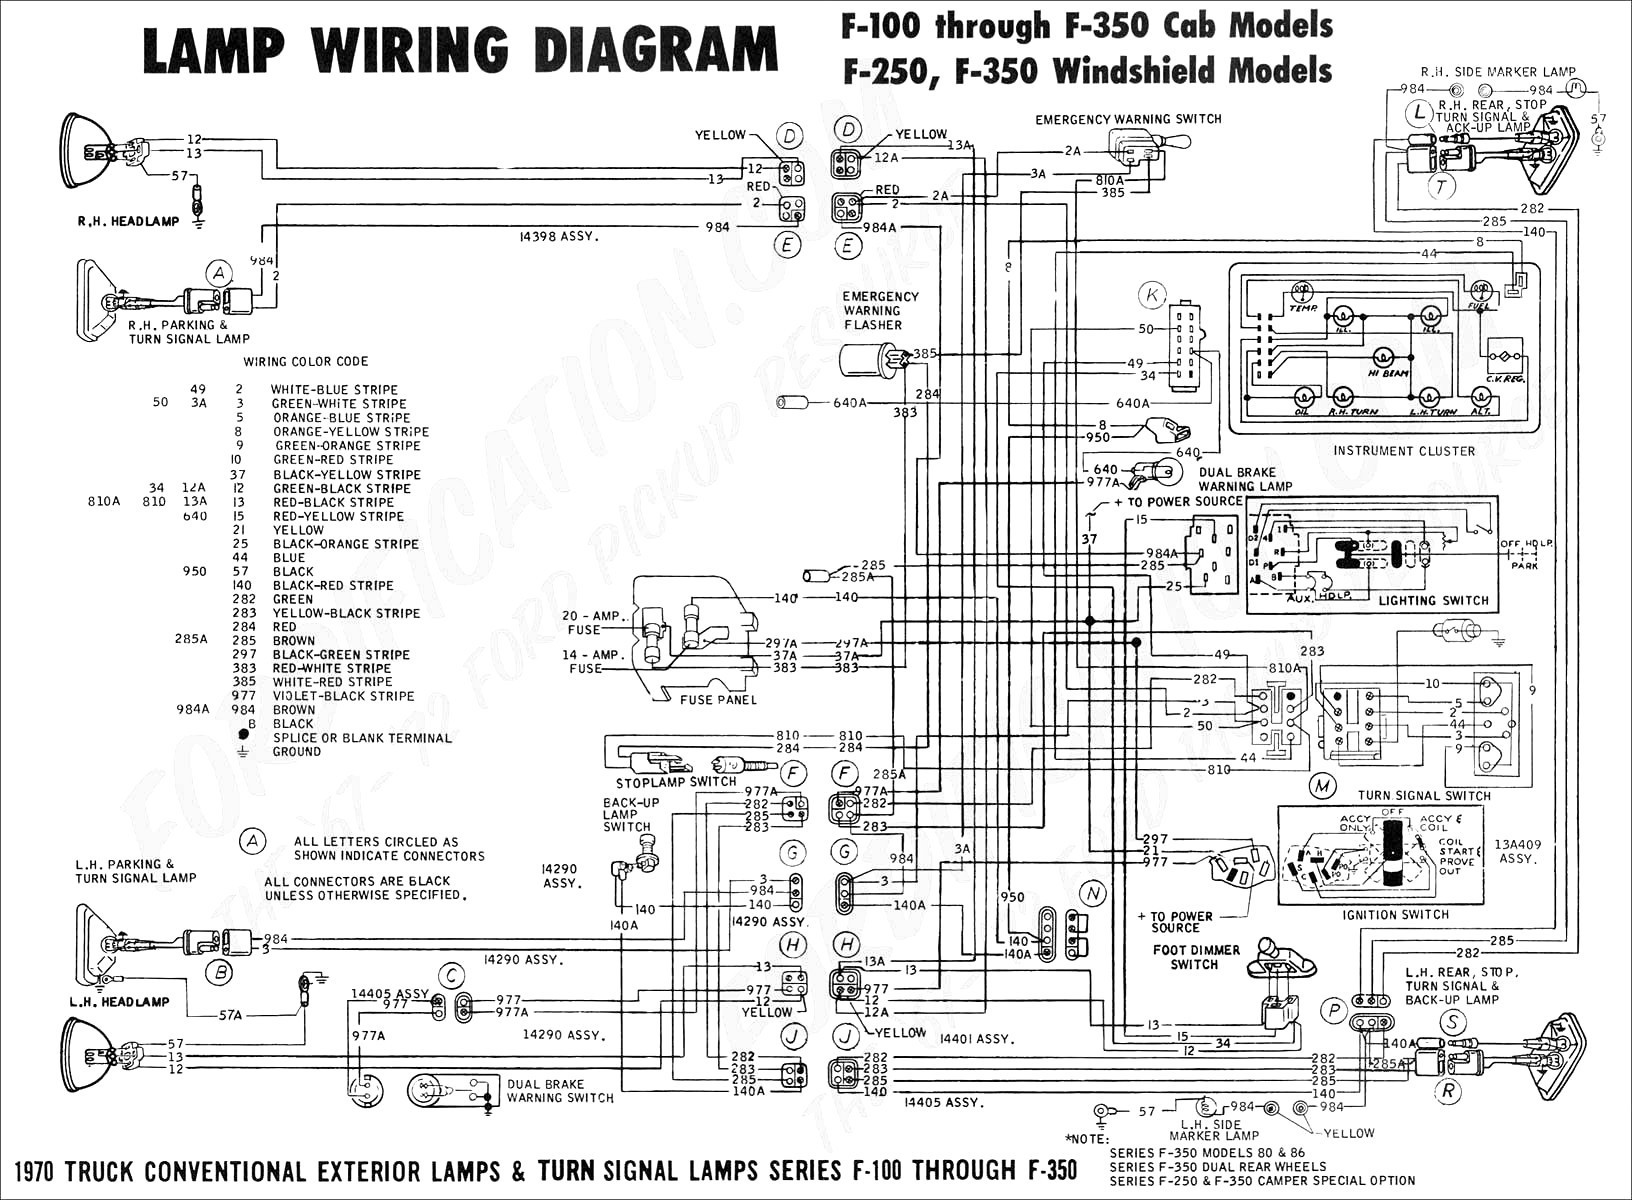 Wiring Diagram For 2006 Cadillac Dts Full from mainetreasurechest.com